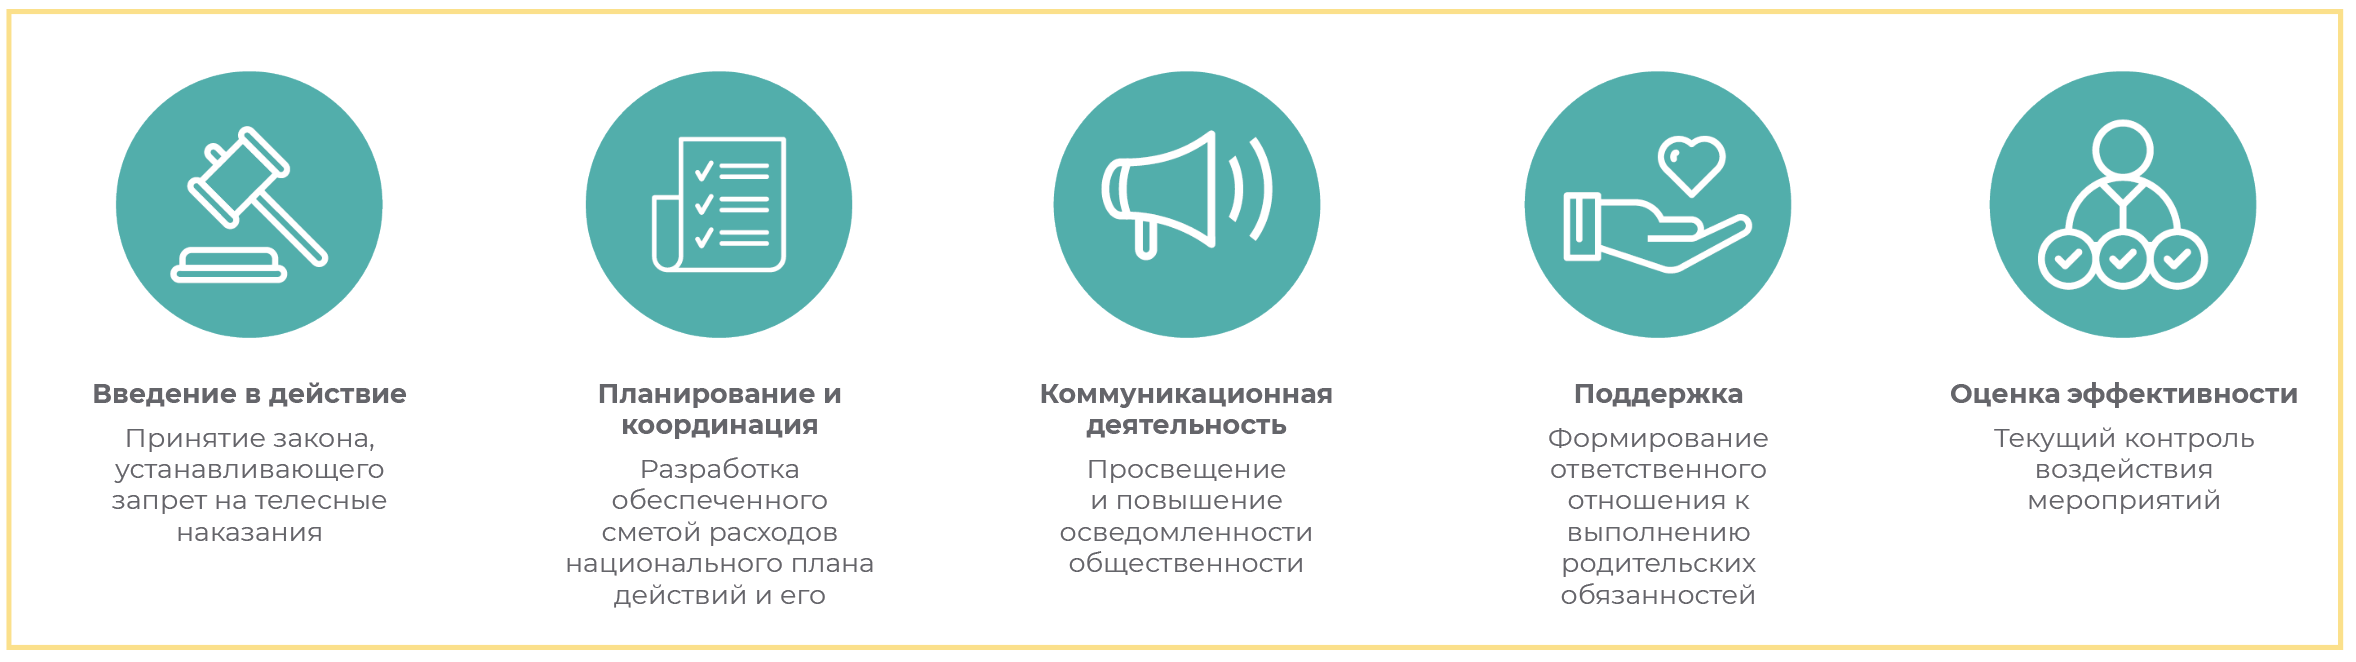 The key steps for moving from prohibition to elimination of corporal punishment Russian